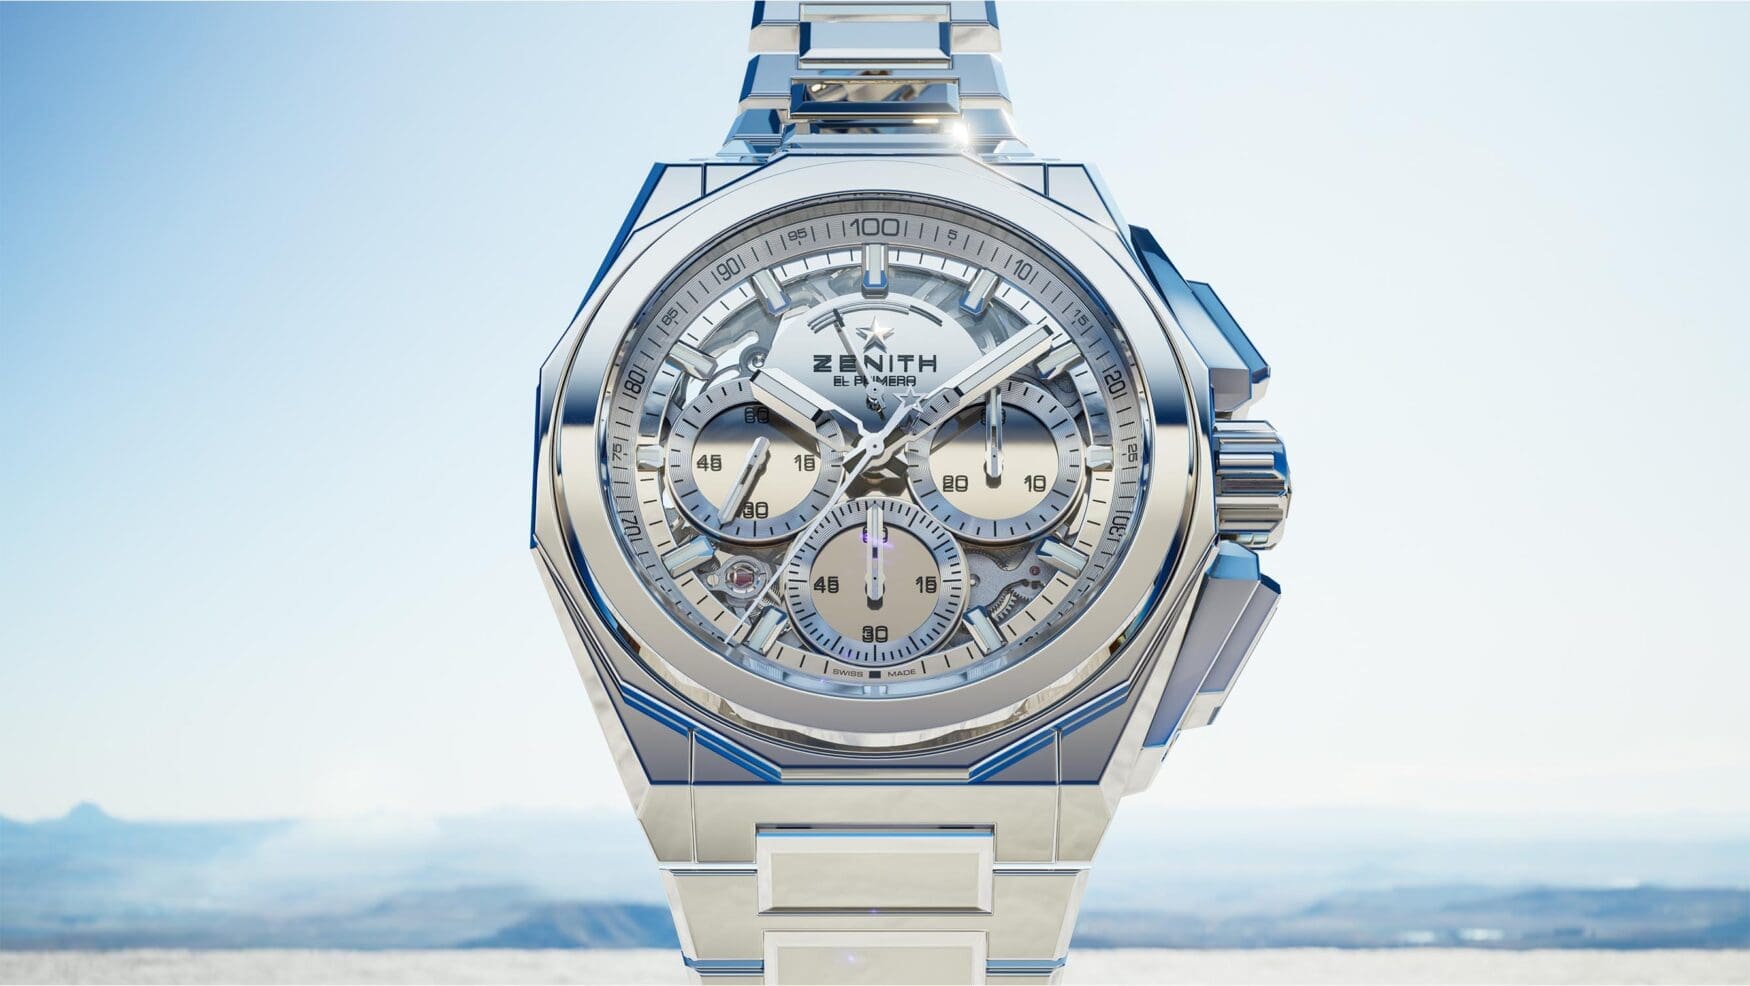 The Zenith Defy Extreme Mirror is a high-tech love letter to chrome